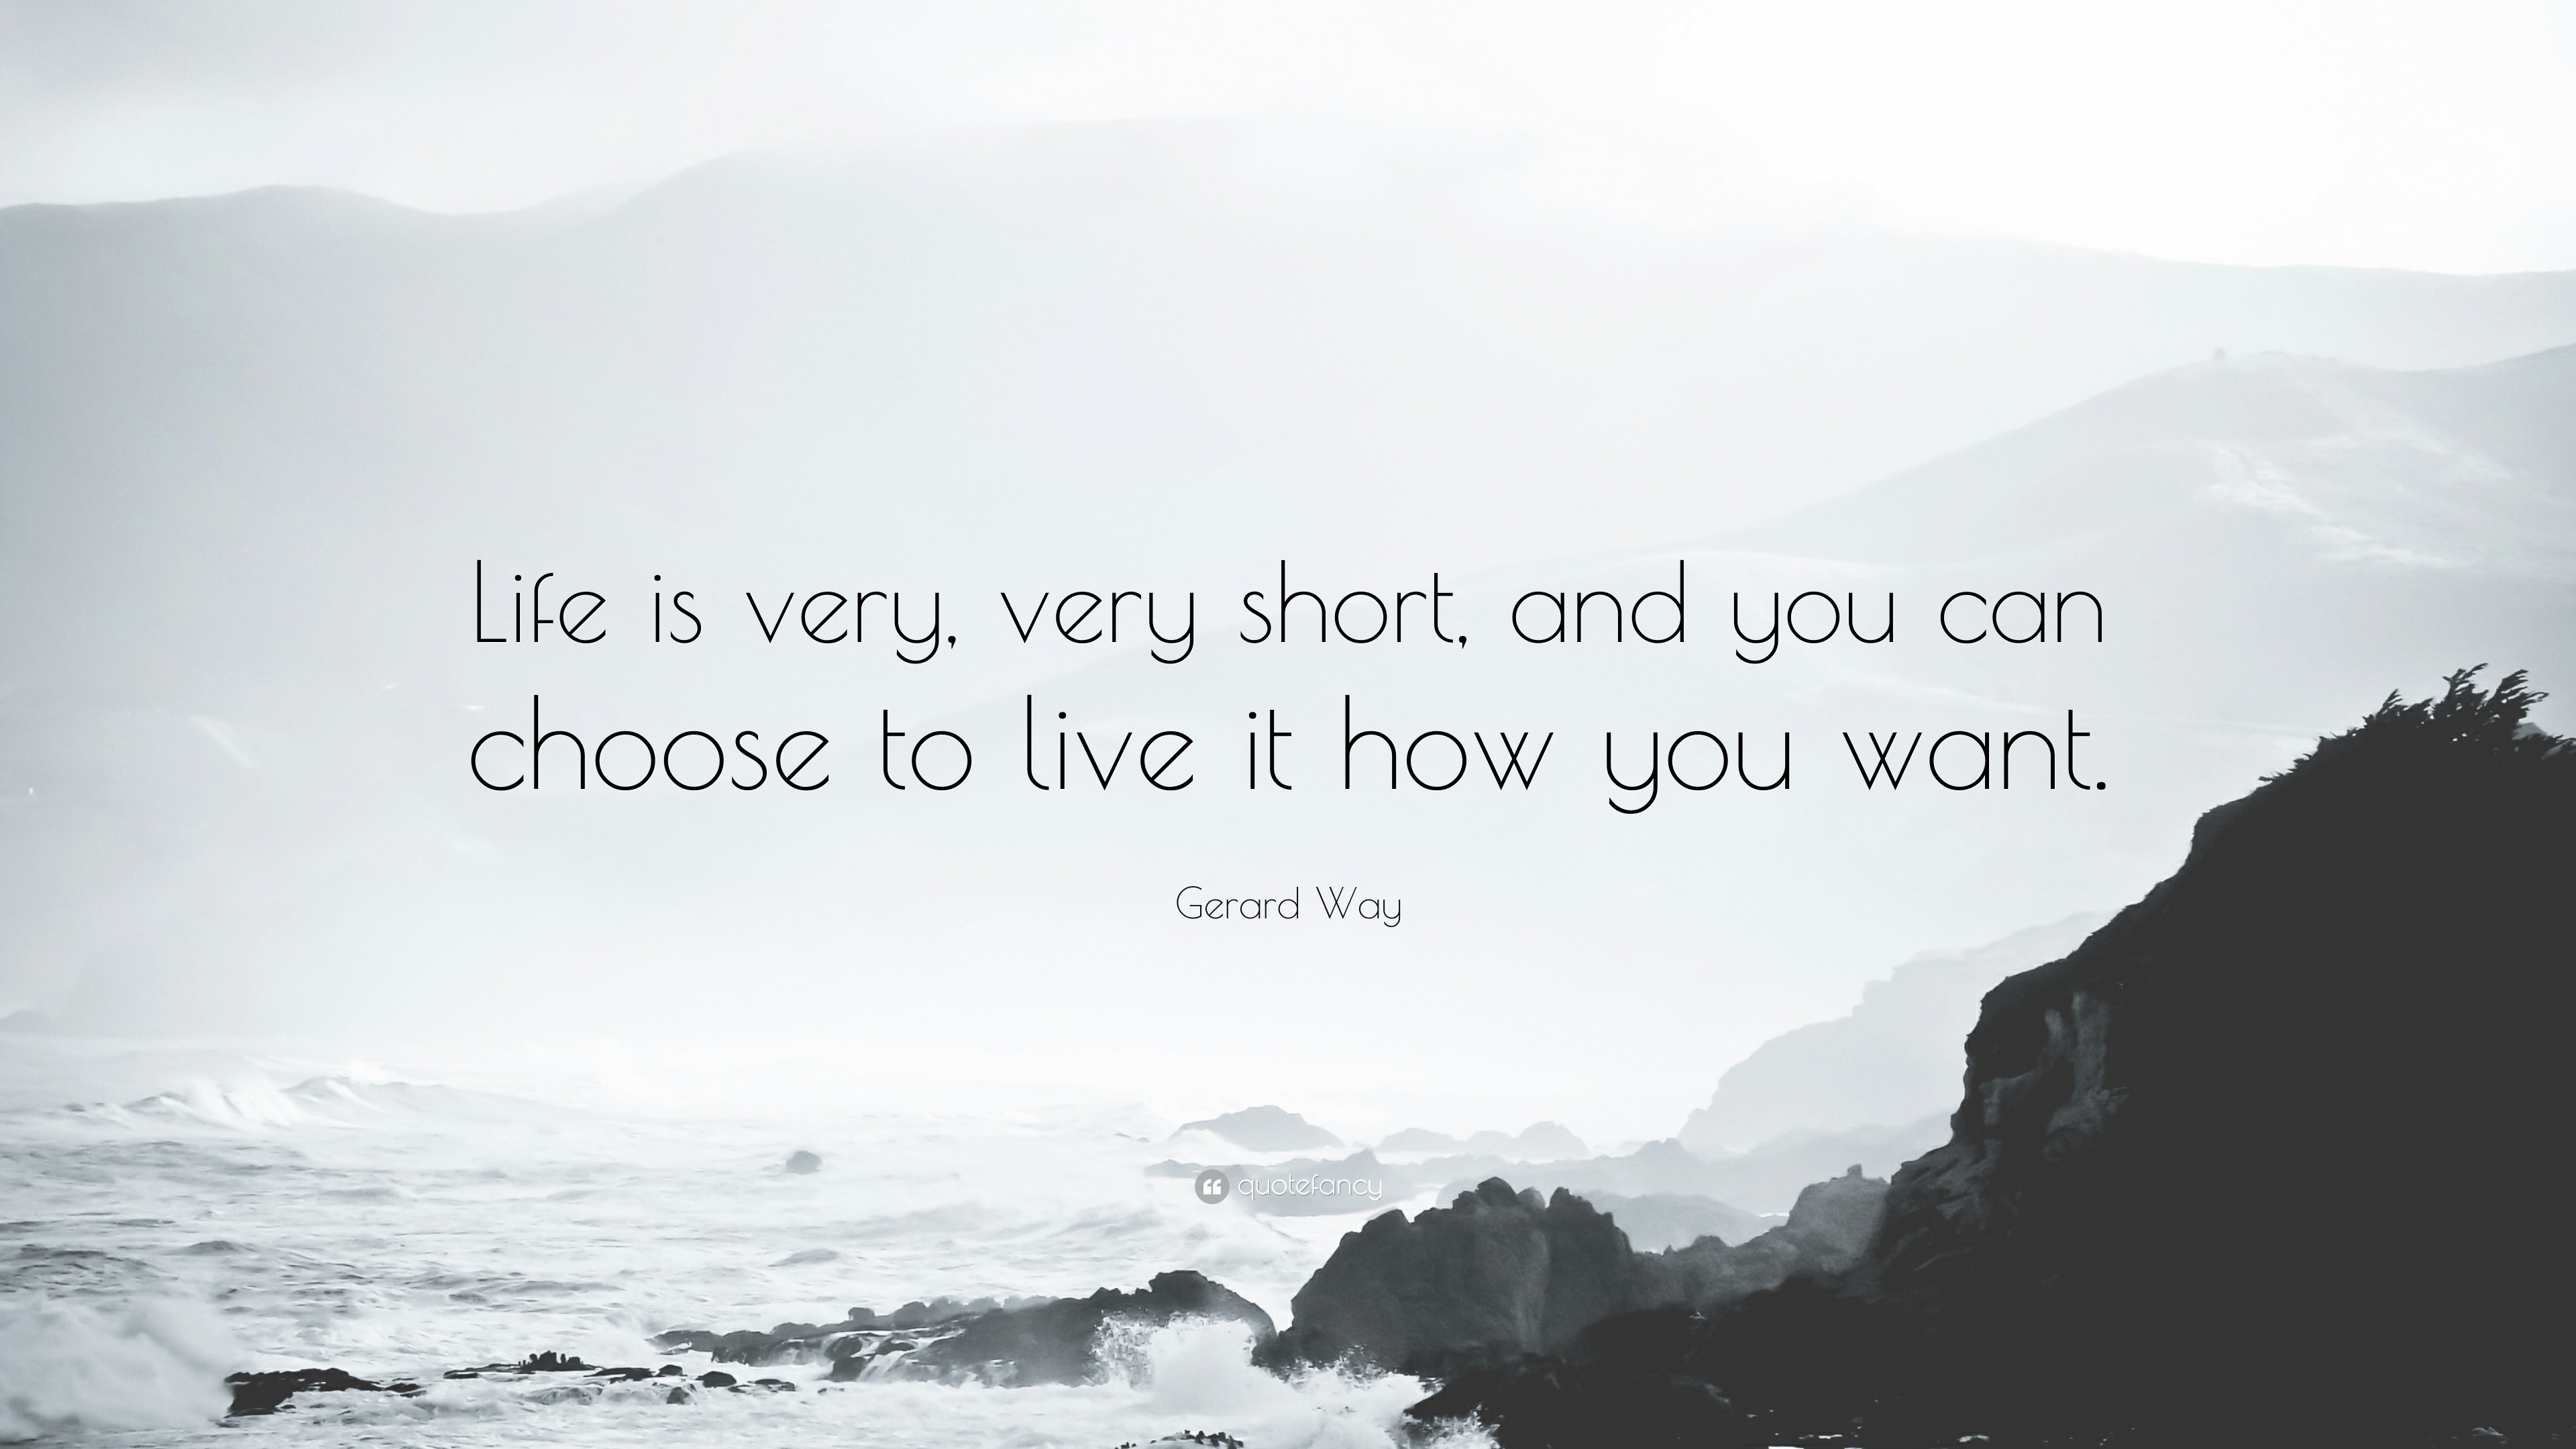 Gerard Way Quote “Life is very very short and you can choose